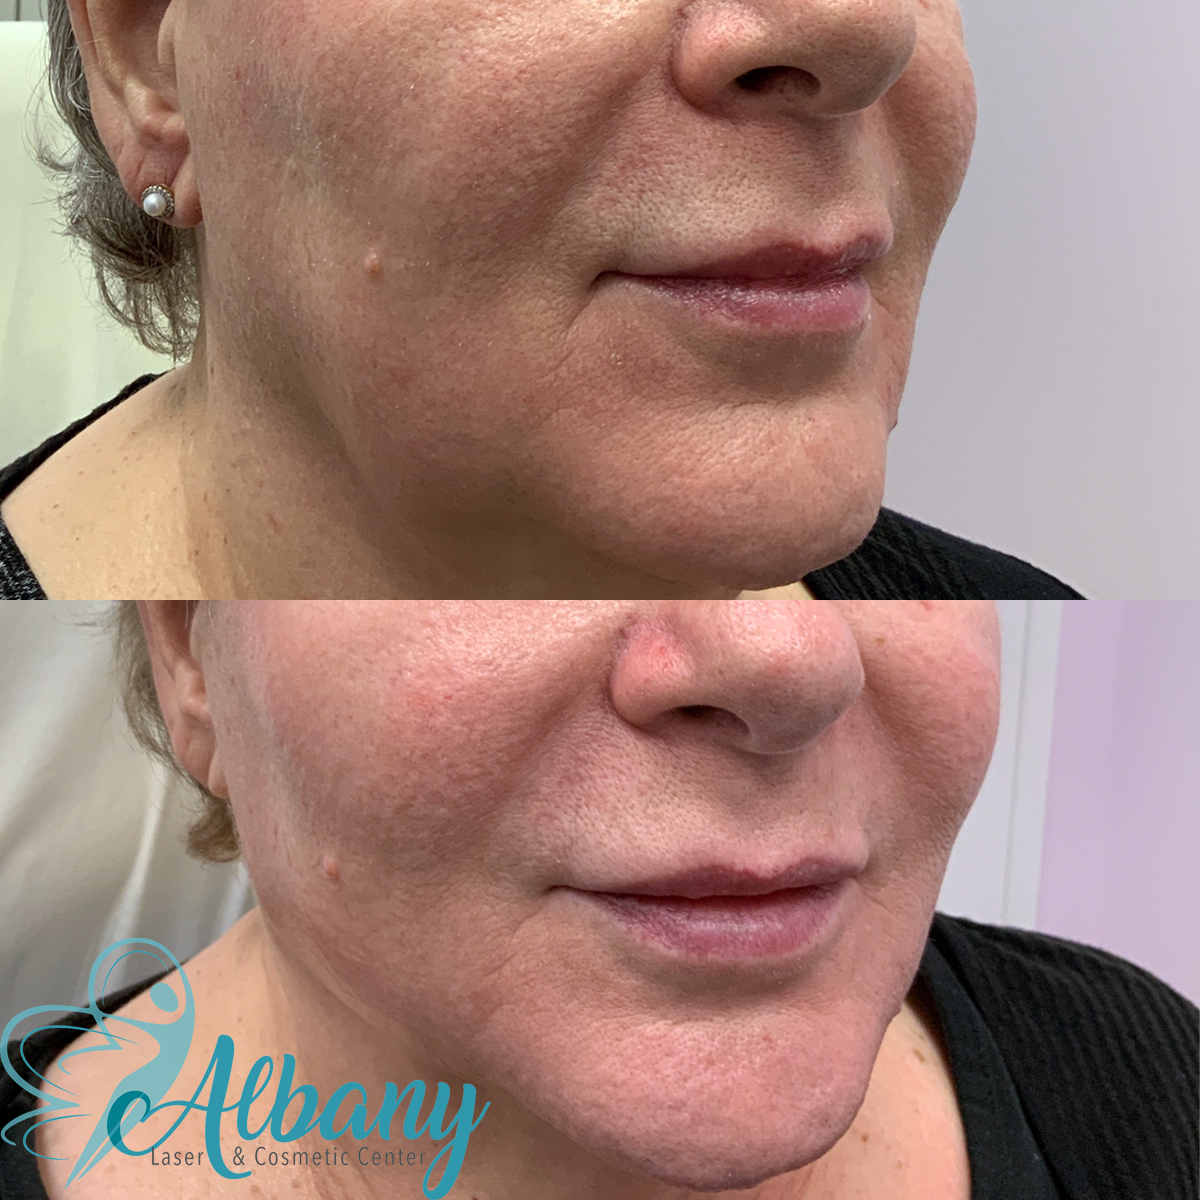 Before and after image of a woman's face showing the right side, demonstrating enhanced skin appearance and fewer wrinkles after Bellafill fillers treatment at Albany Laser & Cosmetic Center.